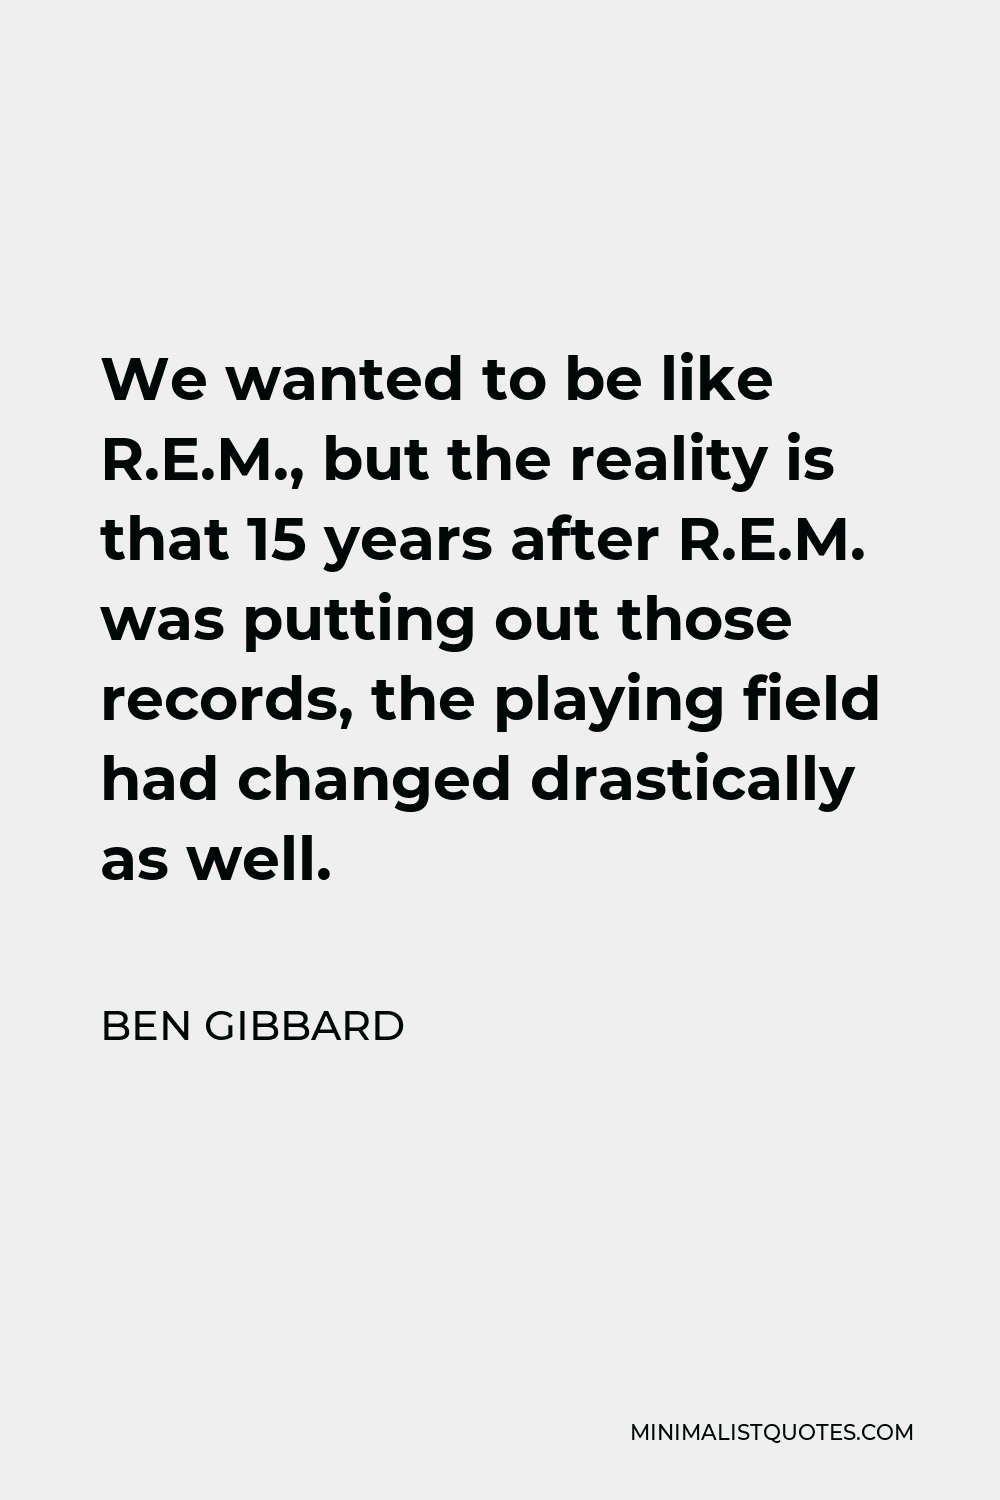 Ben Gibbard Quote - We wanted to be like R.E.M., but the reality is that 15 years after R.E.M. was putting out those records, the playing field had changed drastically as well.